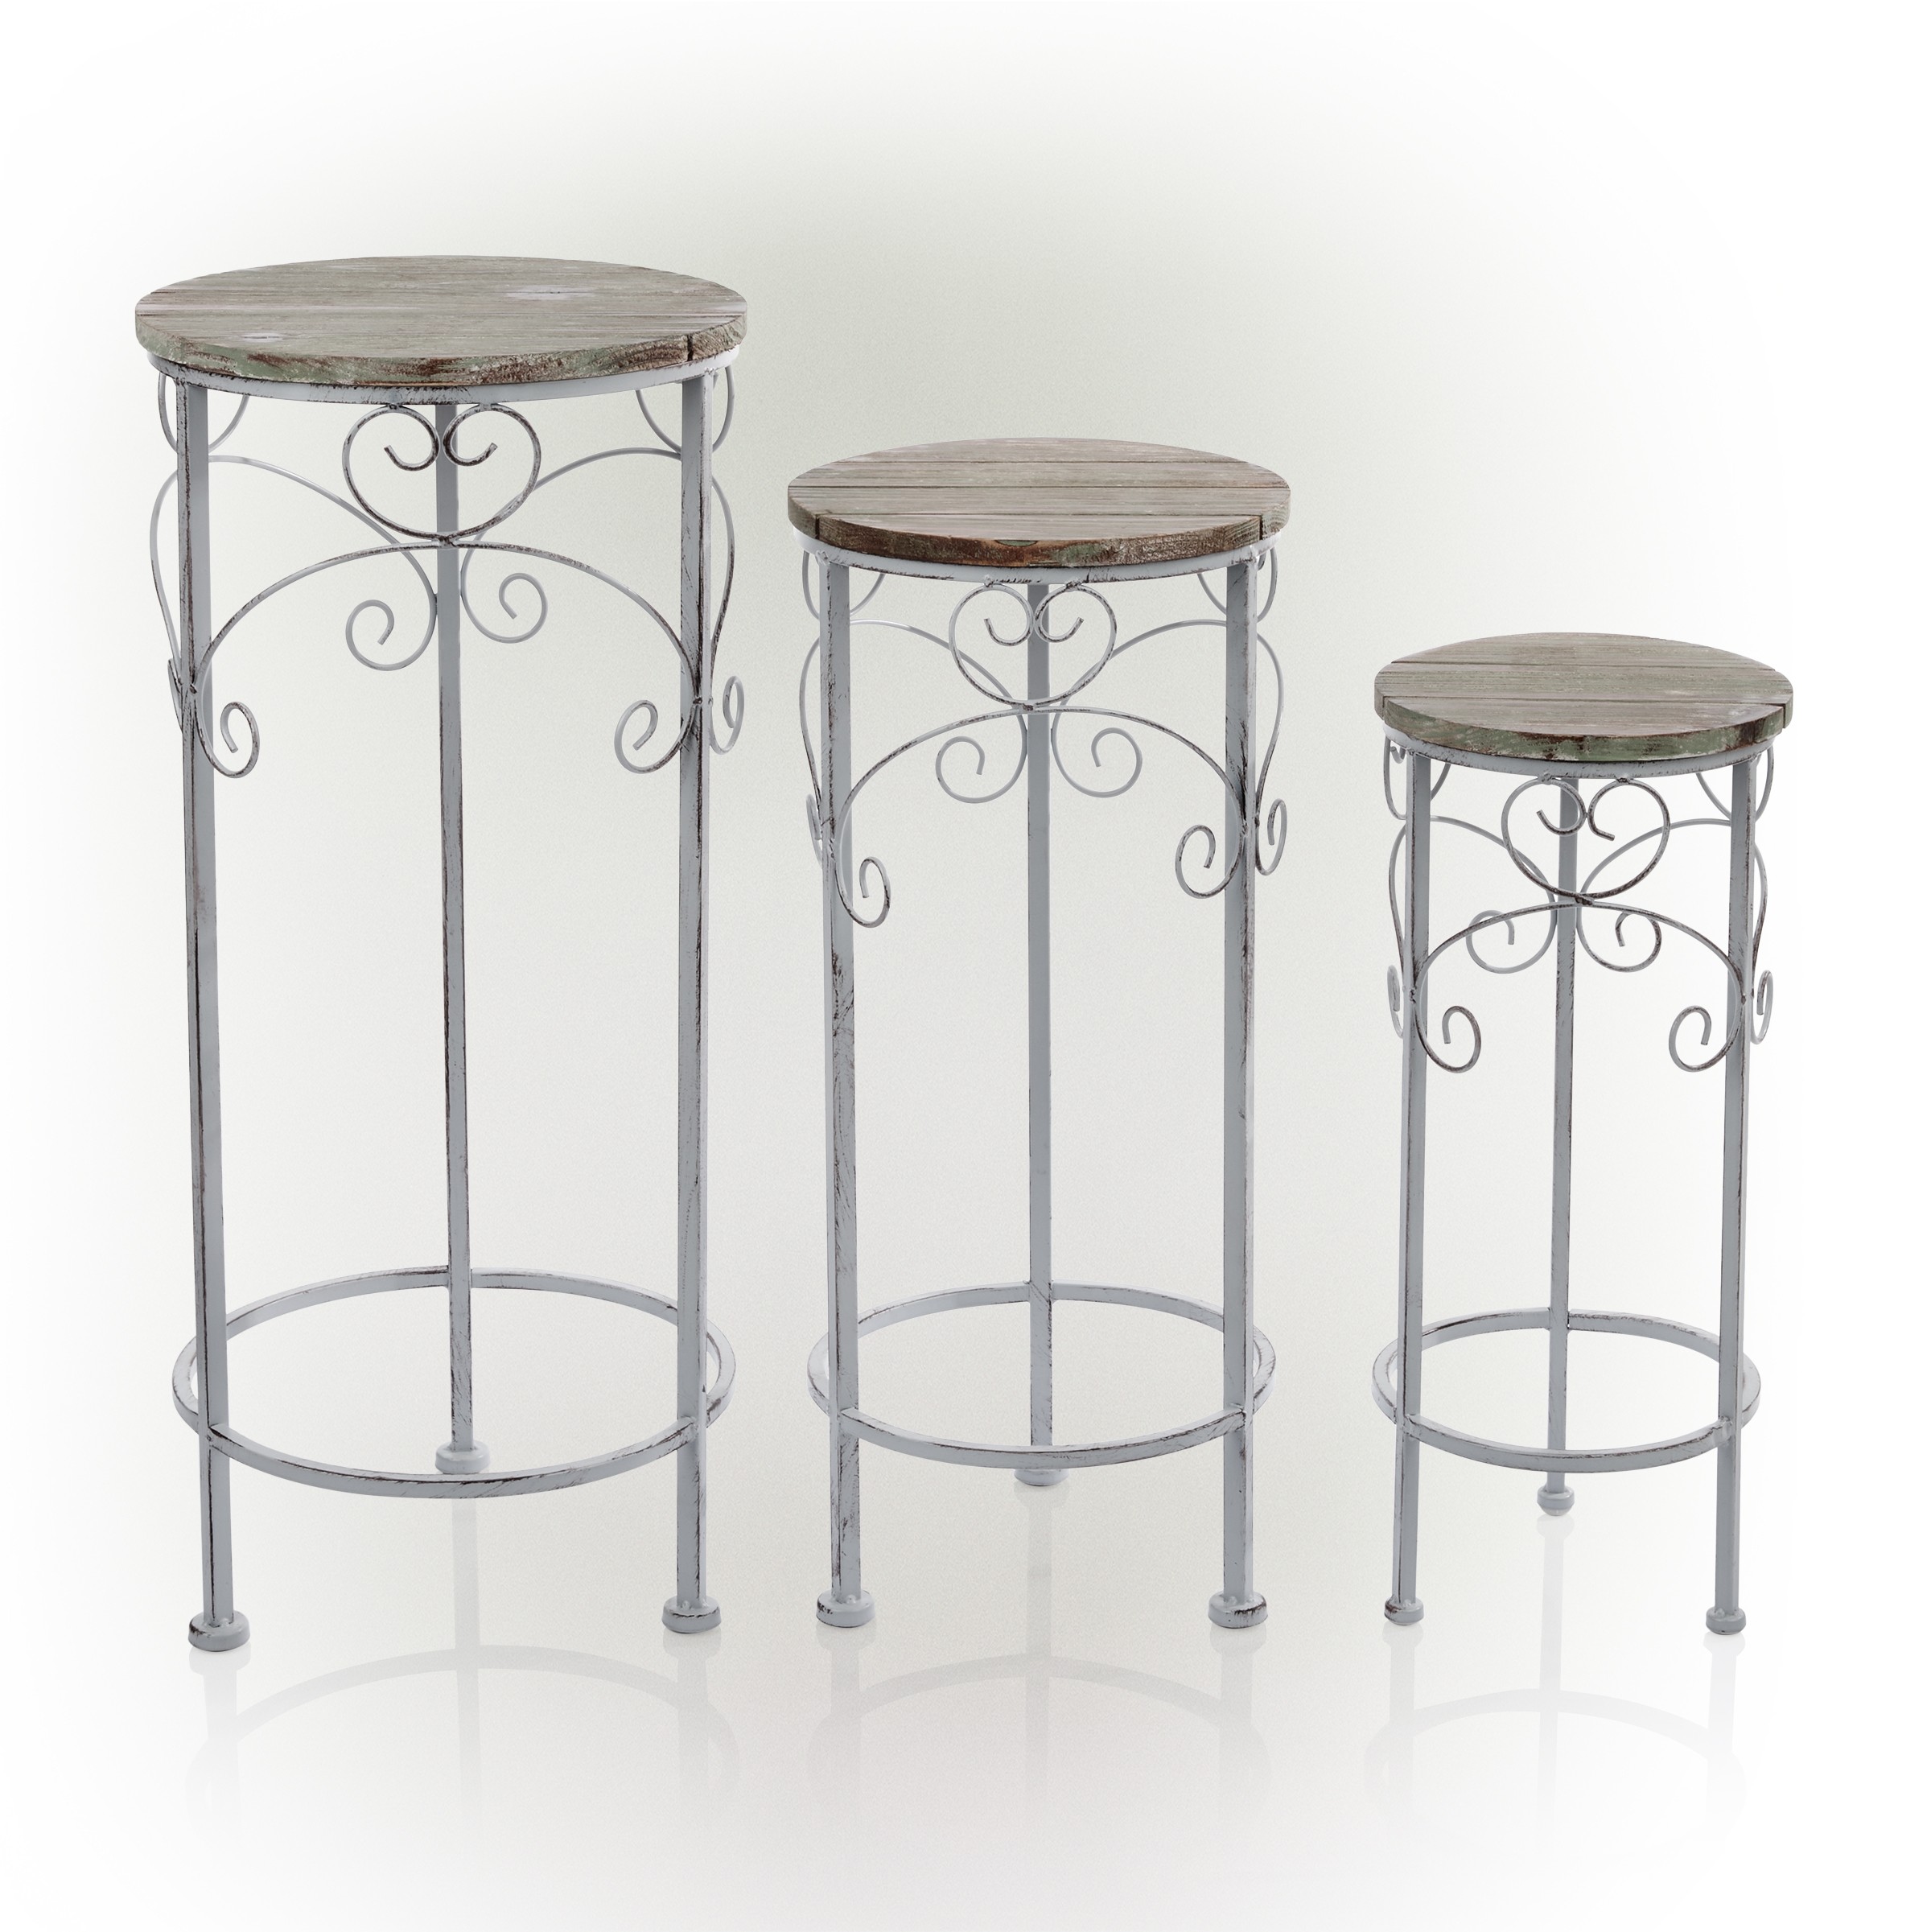 Green Weathered Wood and Metal Plant Stand - Set of 3